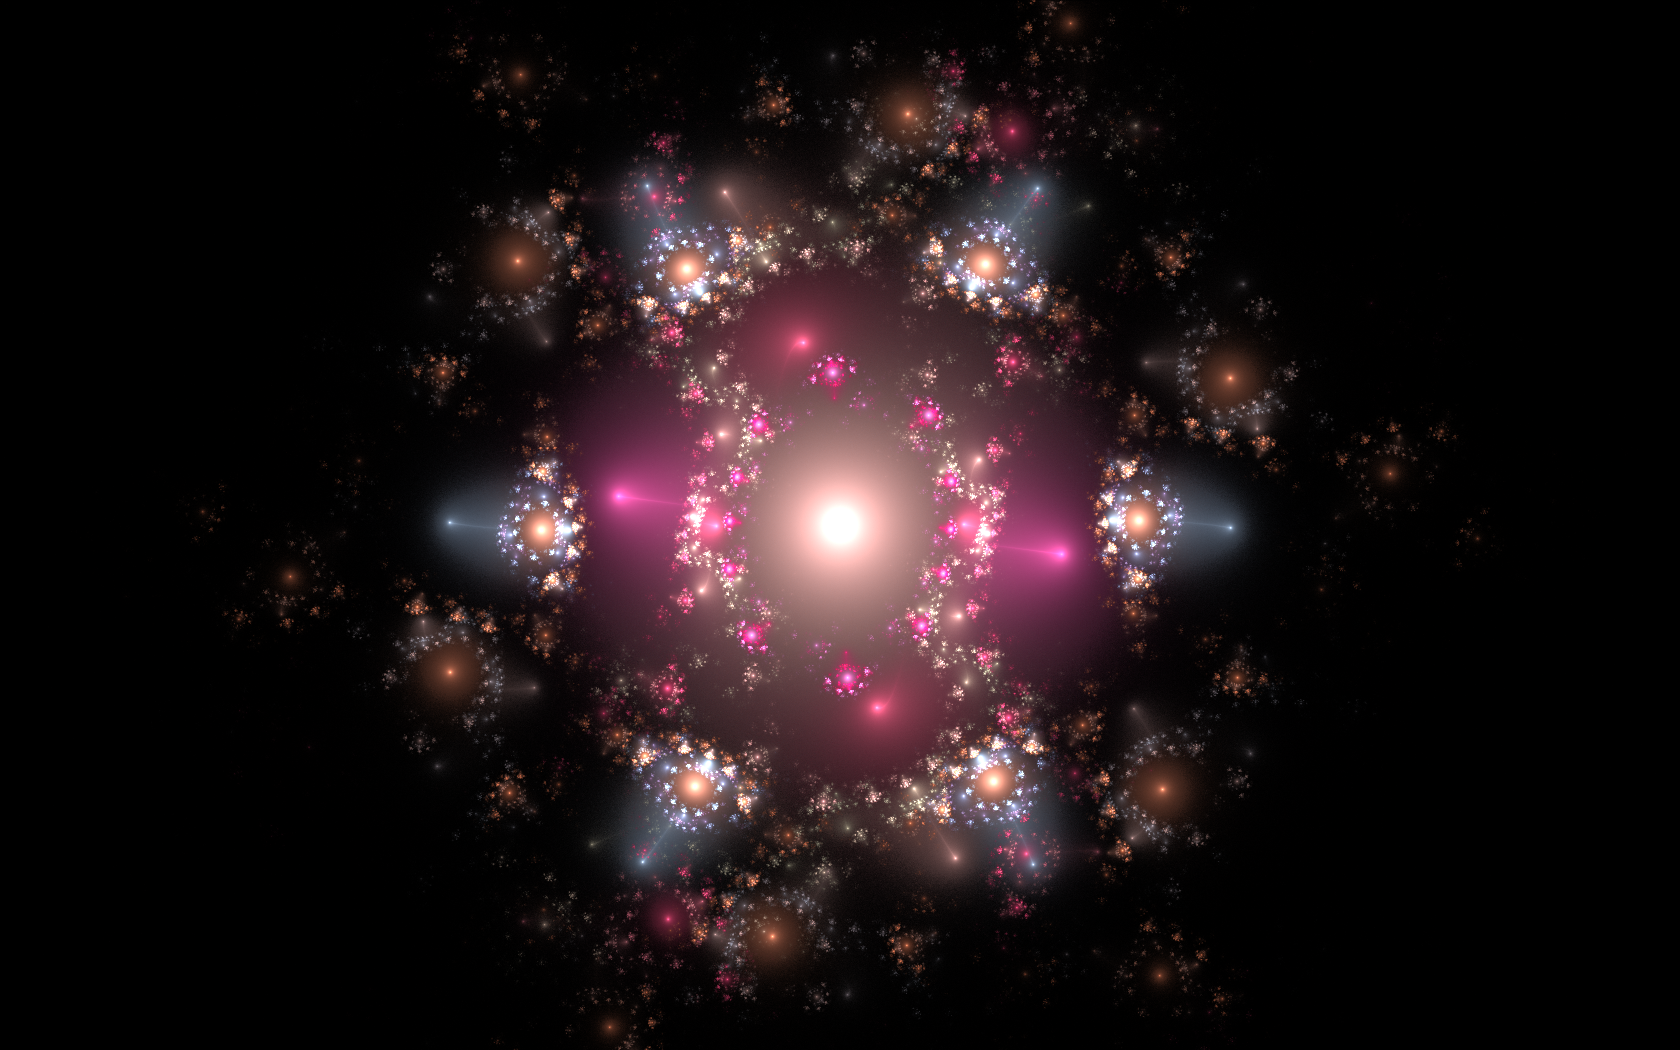 creative_star_by_andrea1981g-d5mllst.png